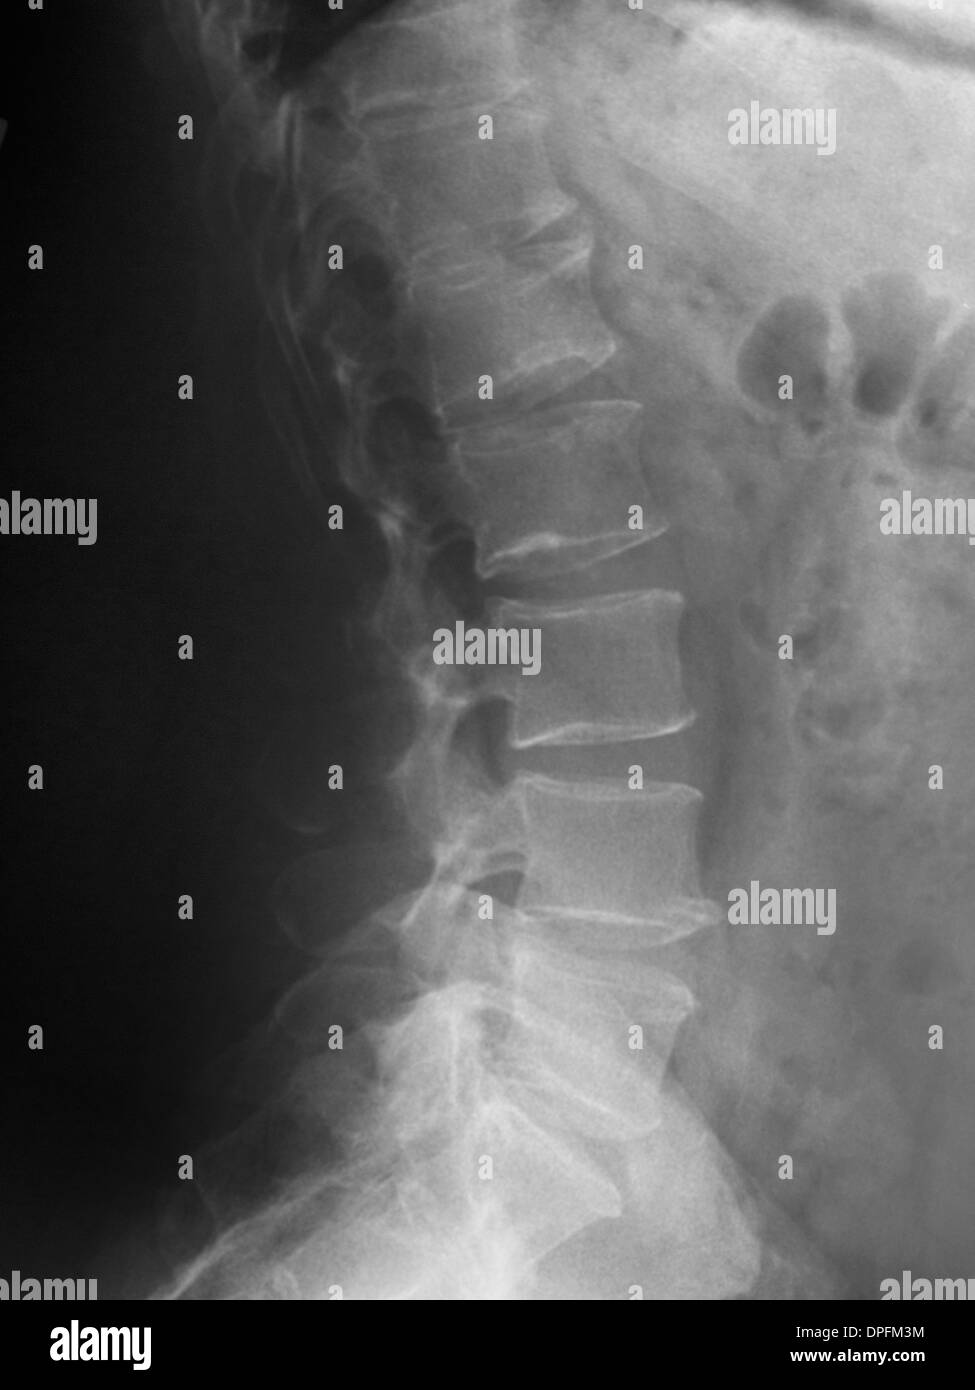 lumbar spine x-ray of a 41 year old man Stock Photo